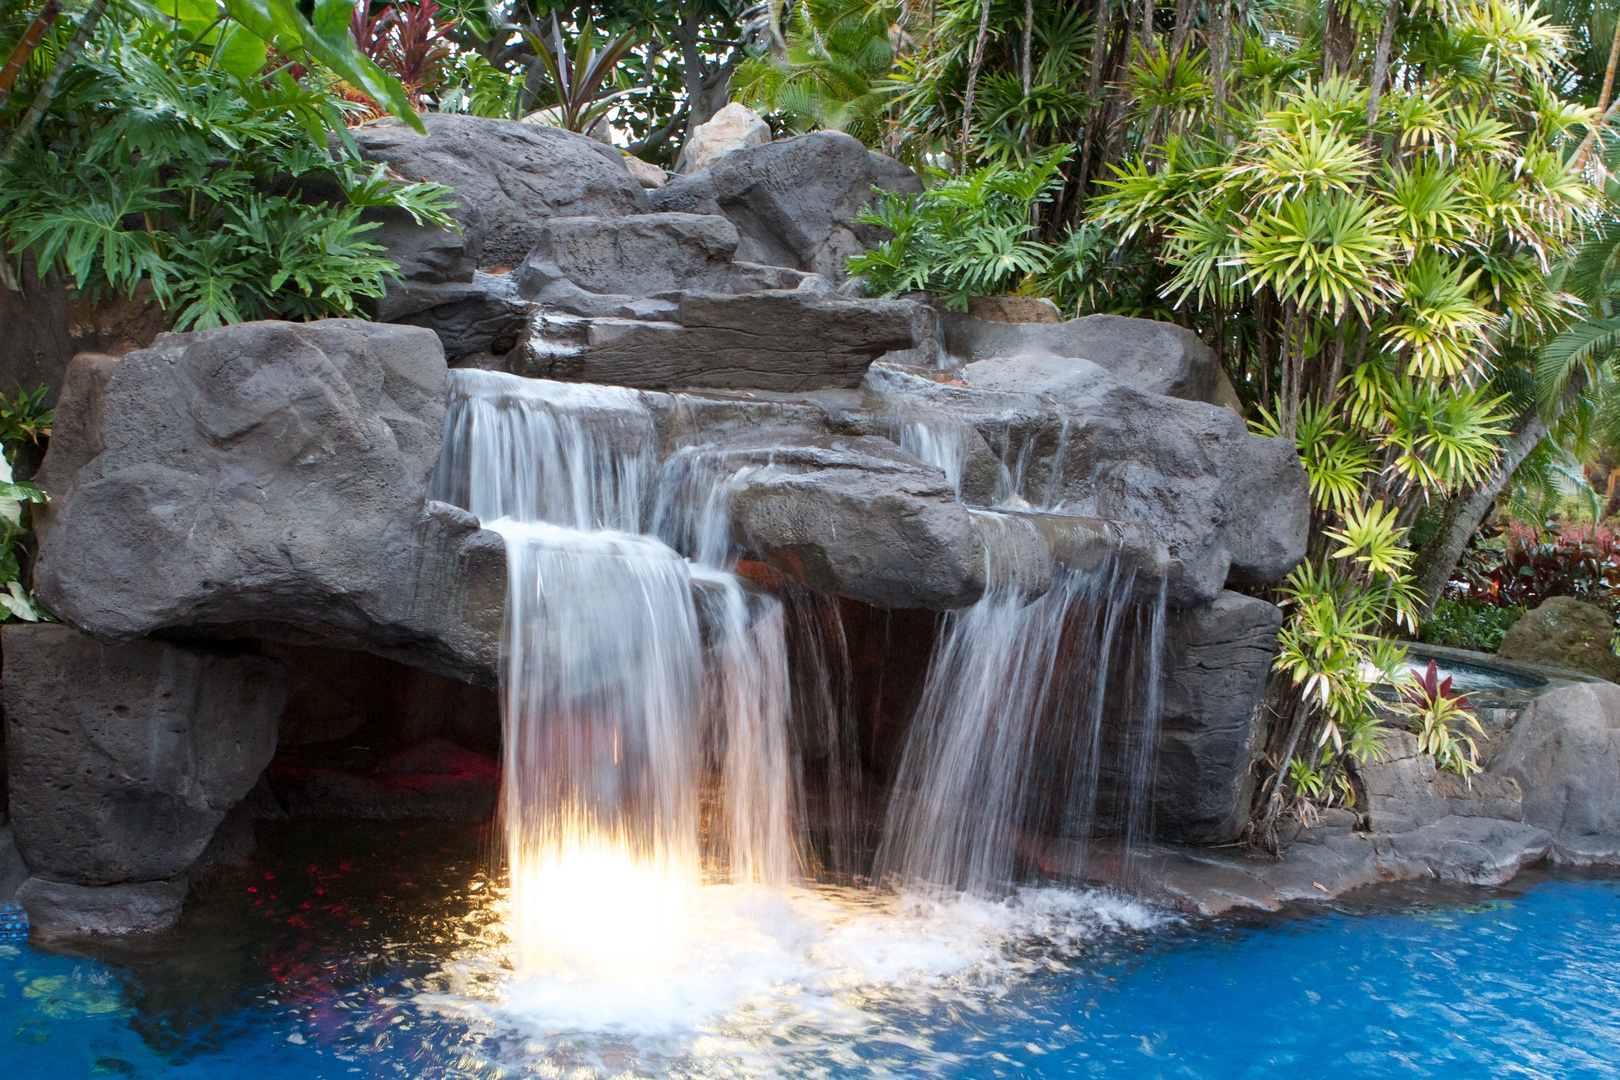 Kailua Vacation Rentals, Paul Mitchell Estate* - Pool waterfall and grotto